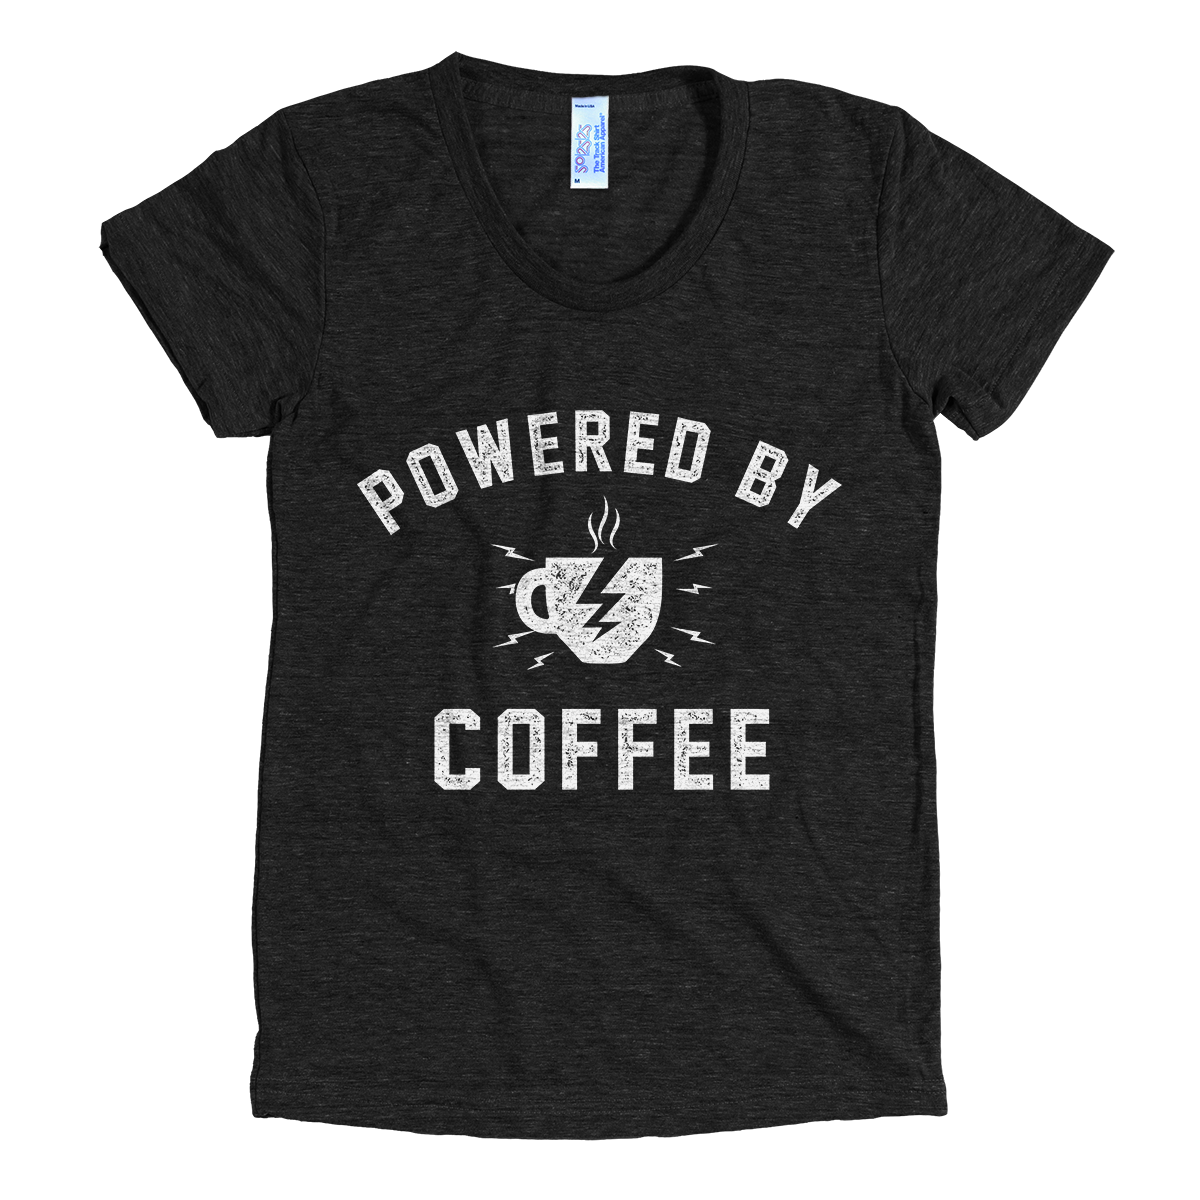  Student powered by Caffeine Student T-Shirt : Clothing, Shoes &  Jewelry